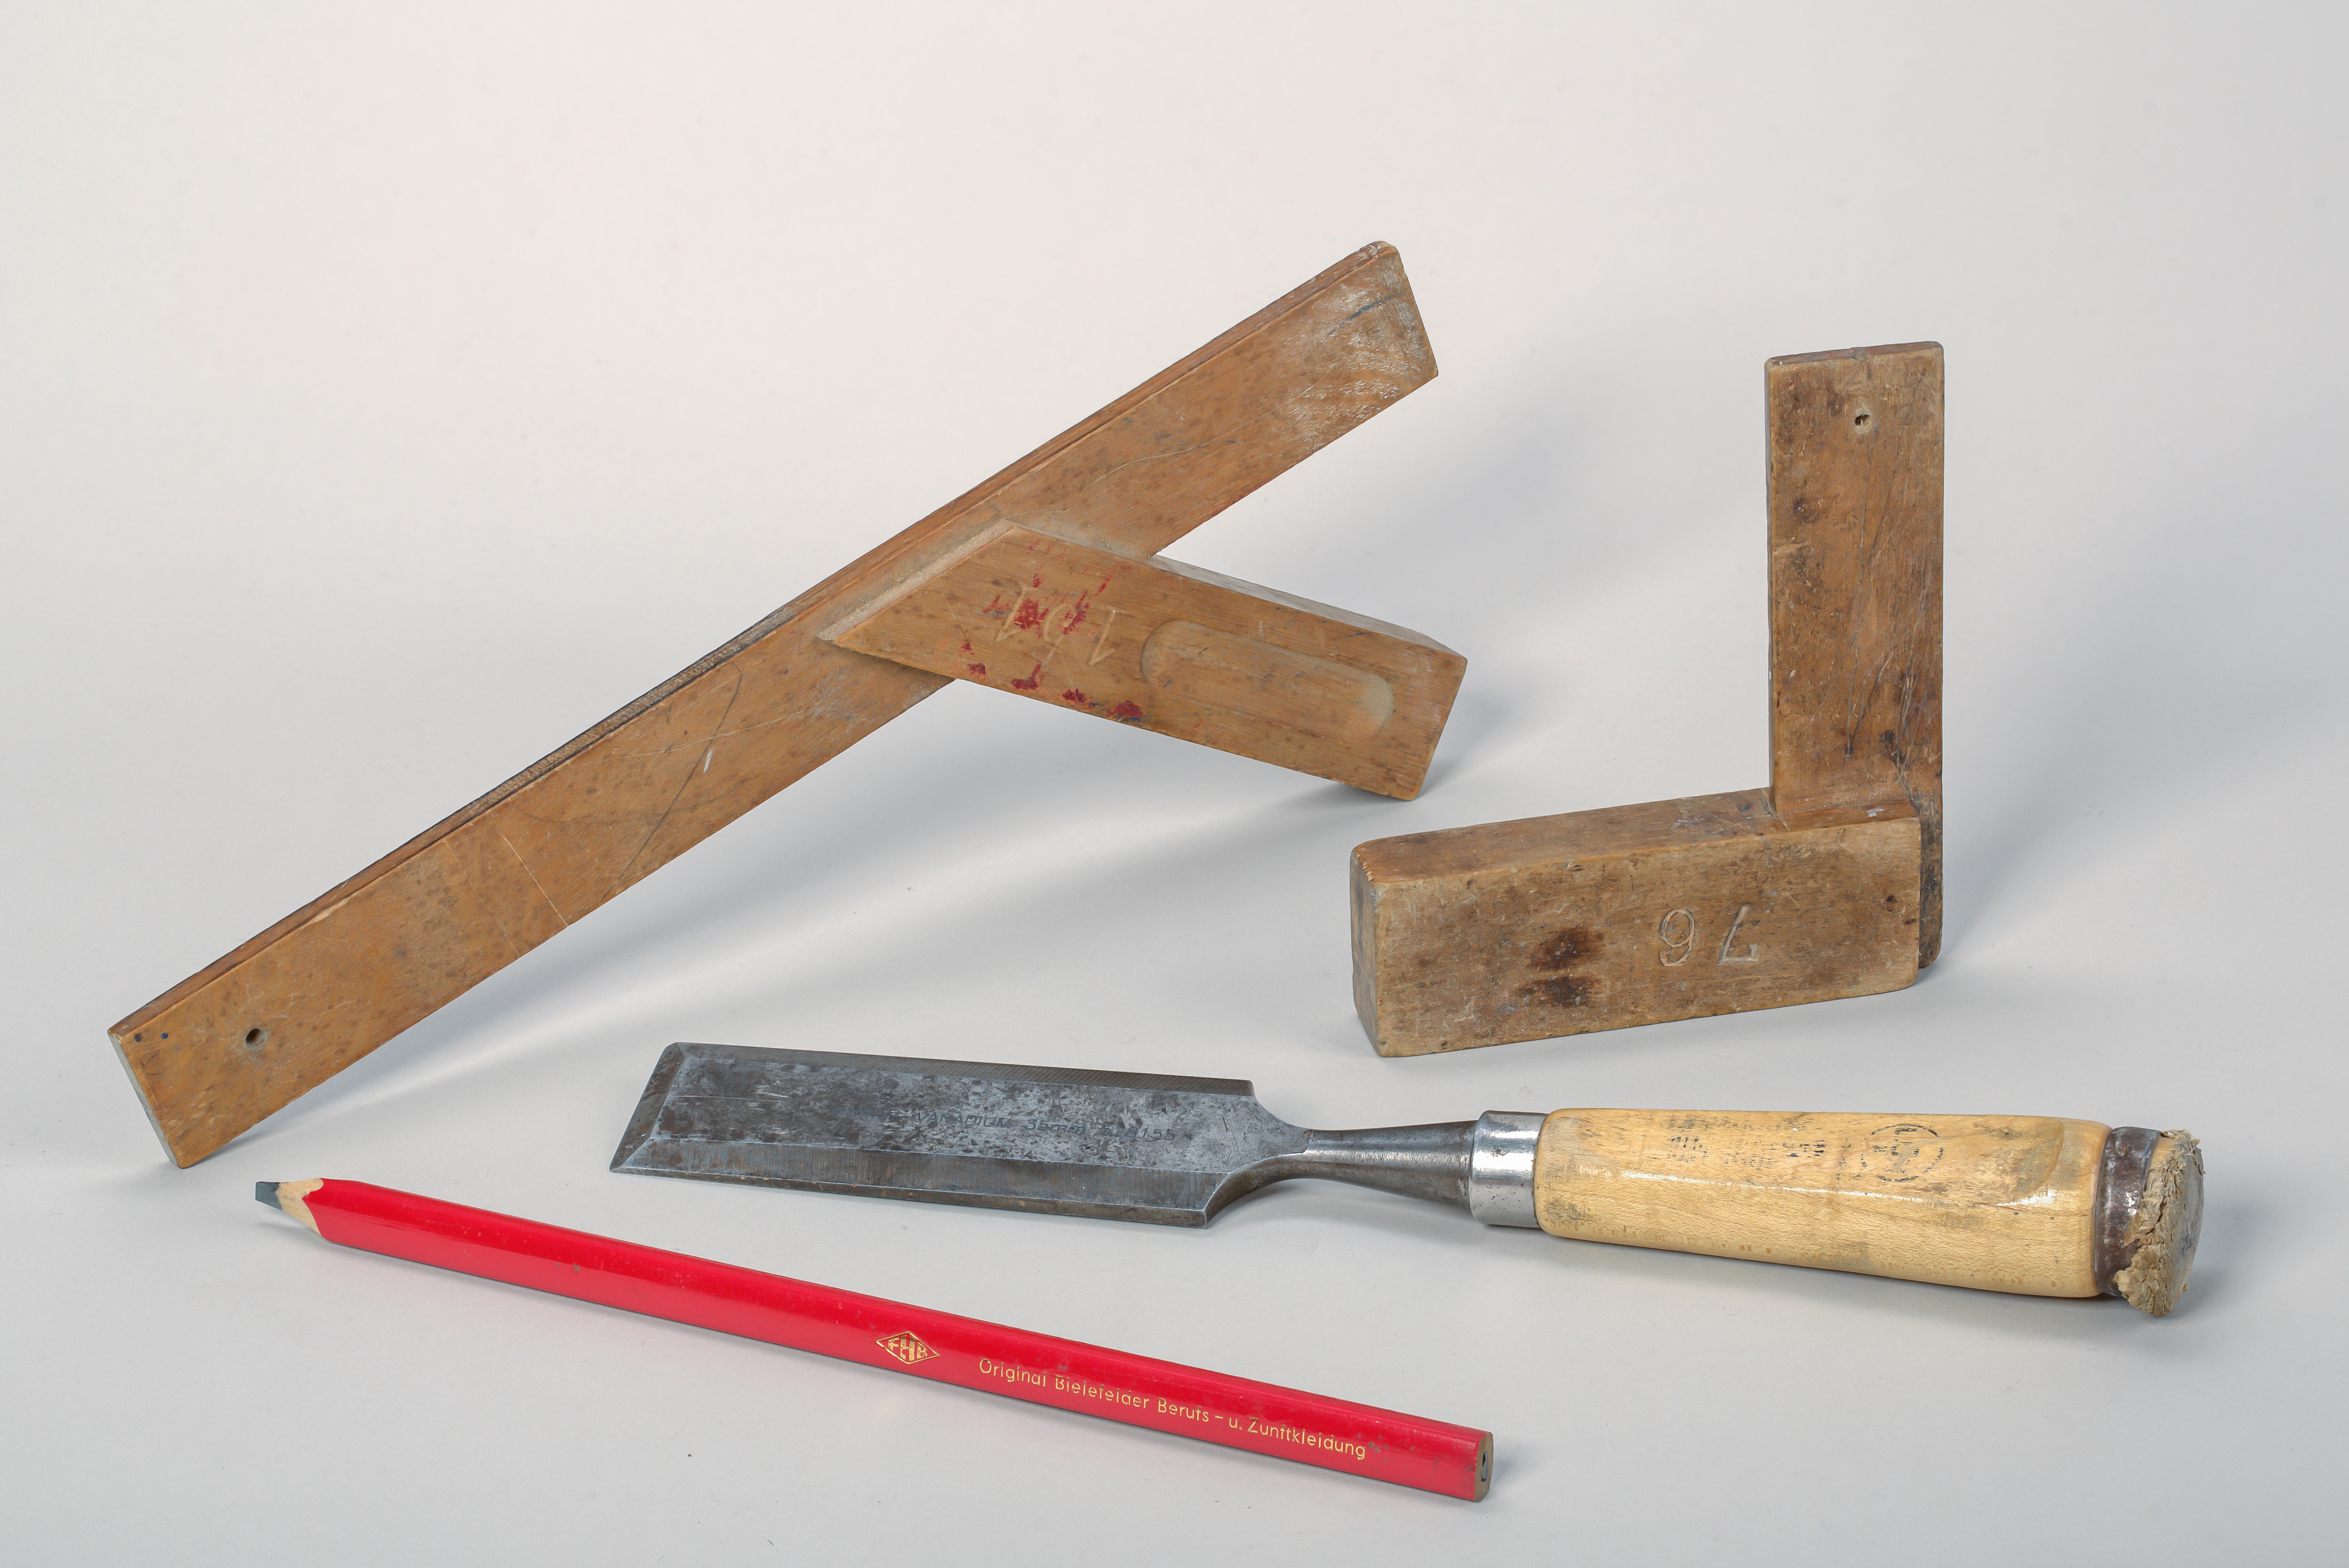 File Carpenter Tools Beveled Edge Chisel Two Angle Gauges And Carpenters Pencil 01 Jpg Wikimedia Commons